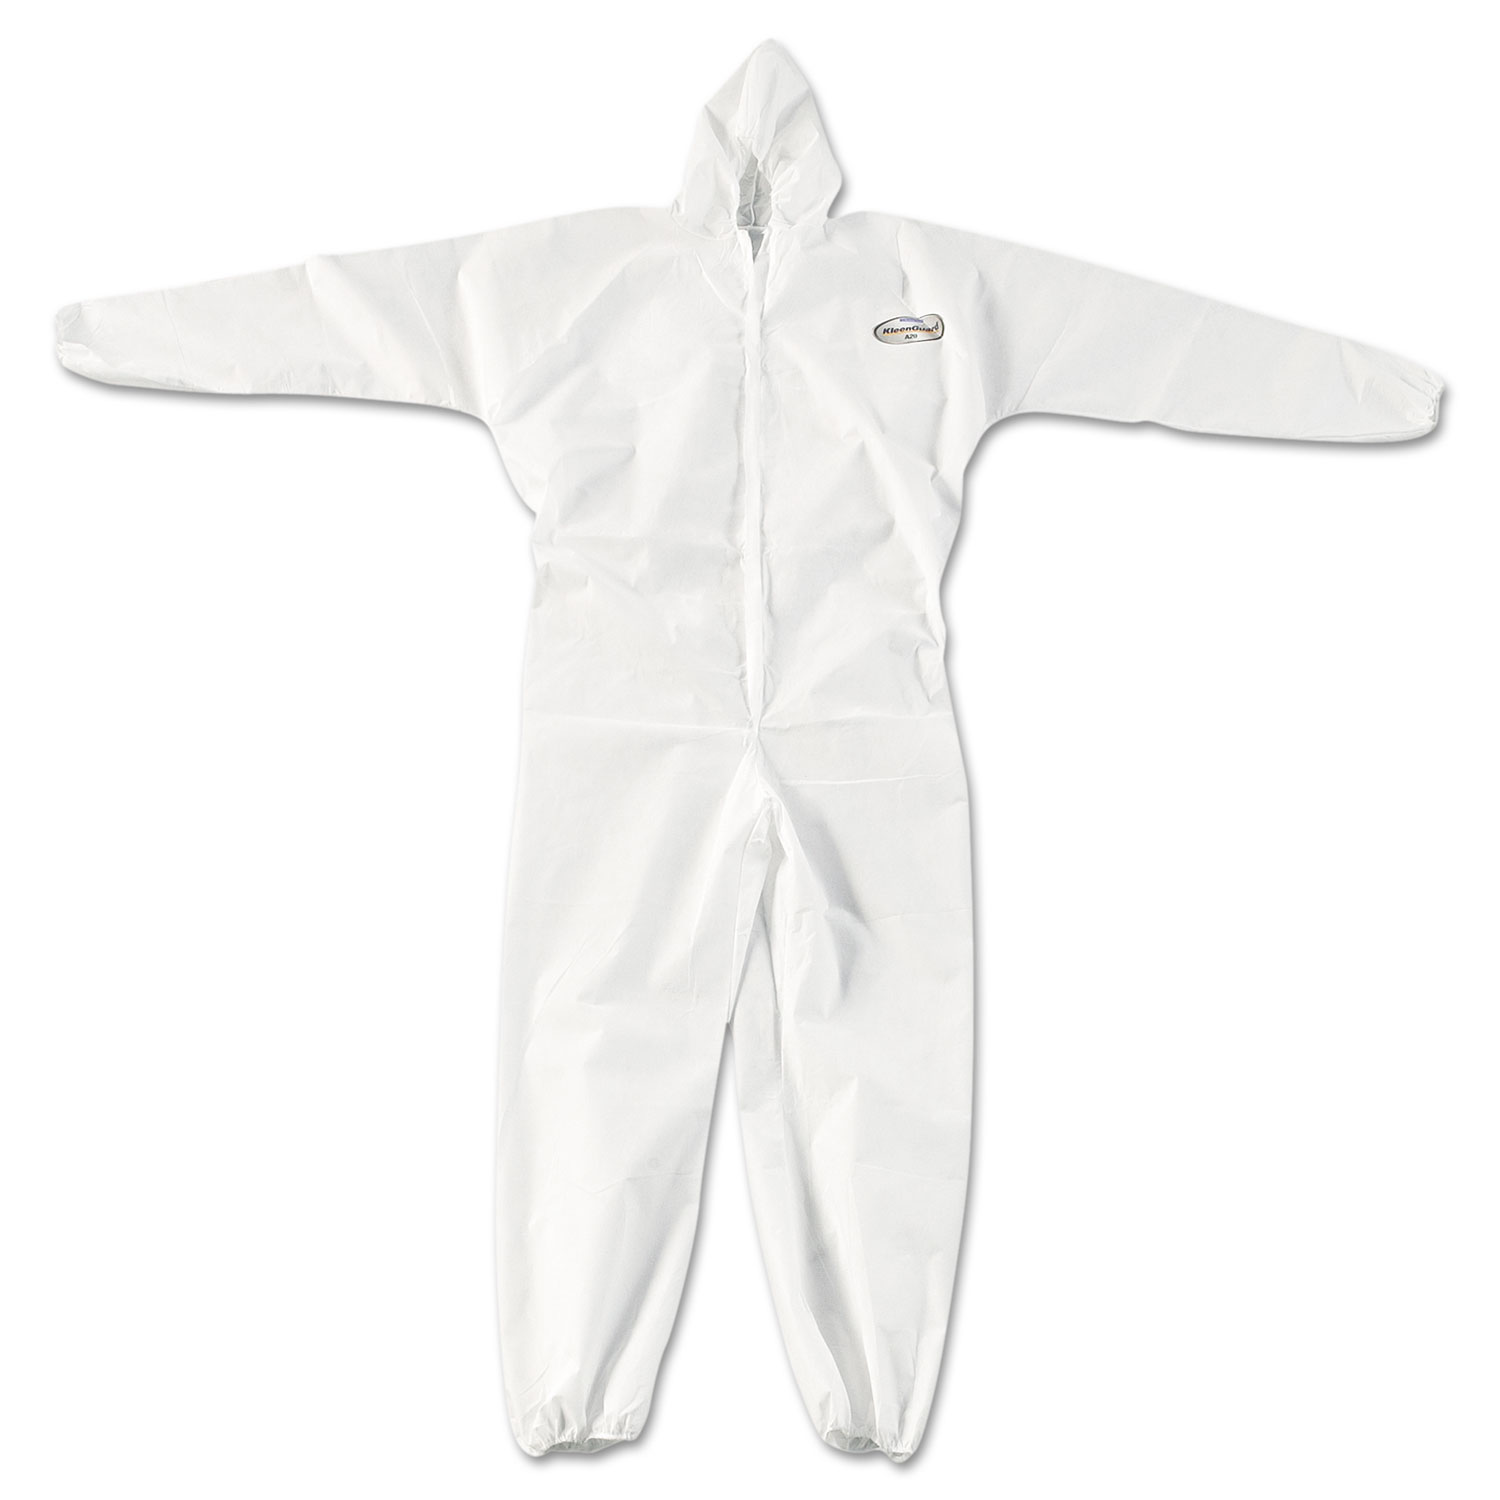 A20 Elastic Back, Cuff & Ankle Hooded Coveralls, Zip, X-Large, White, 24/Carton